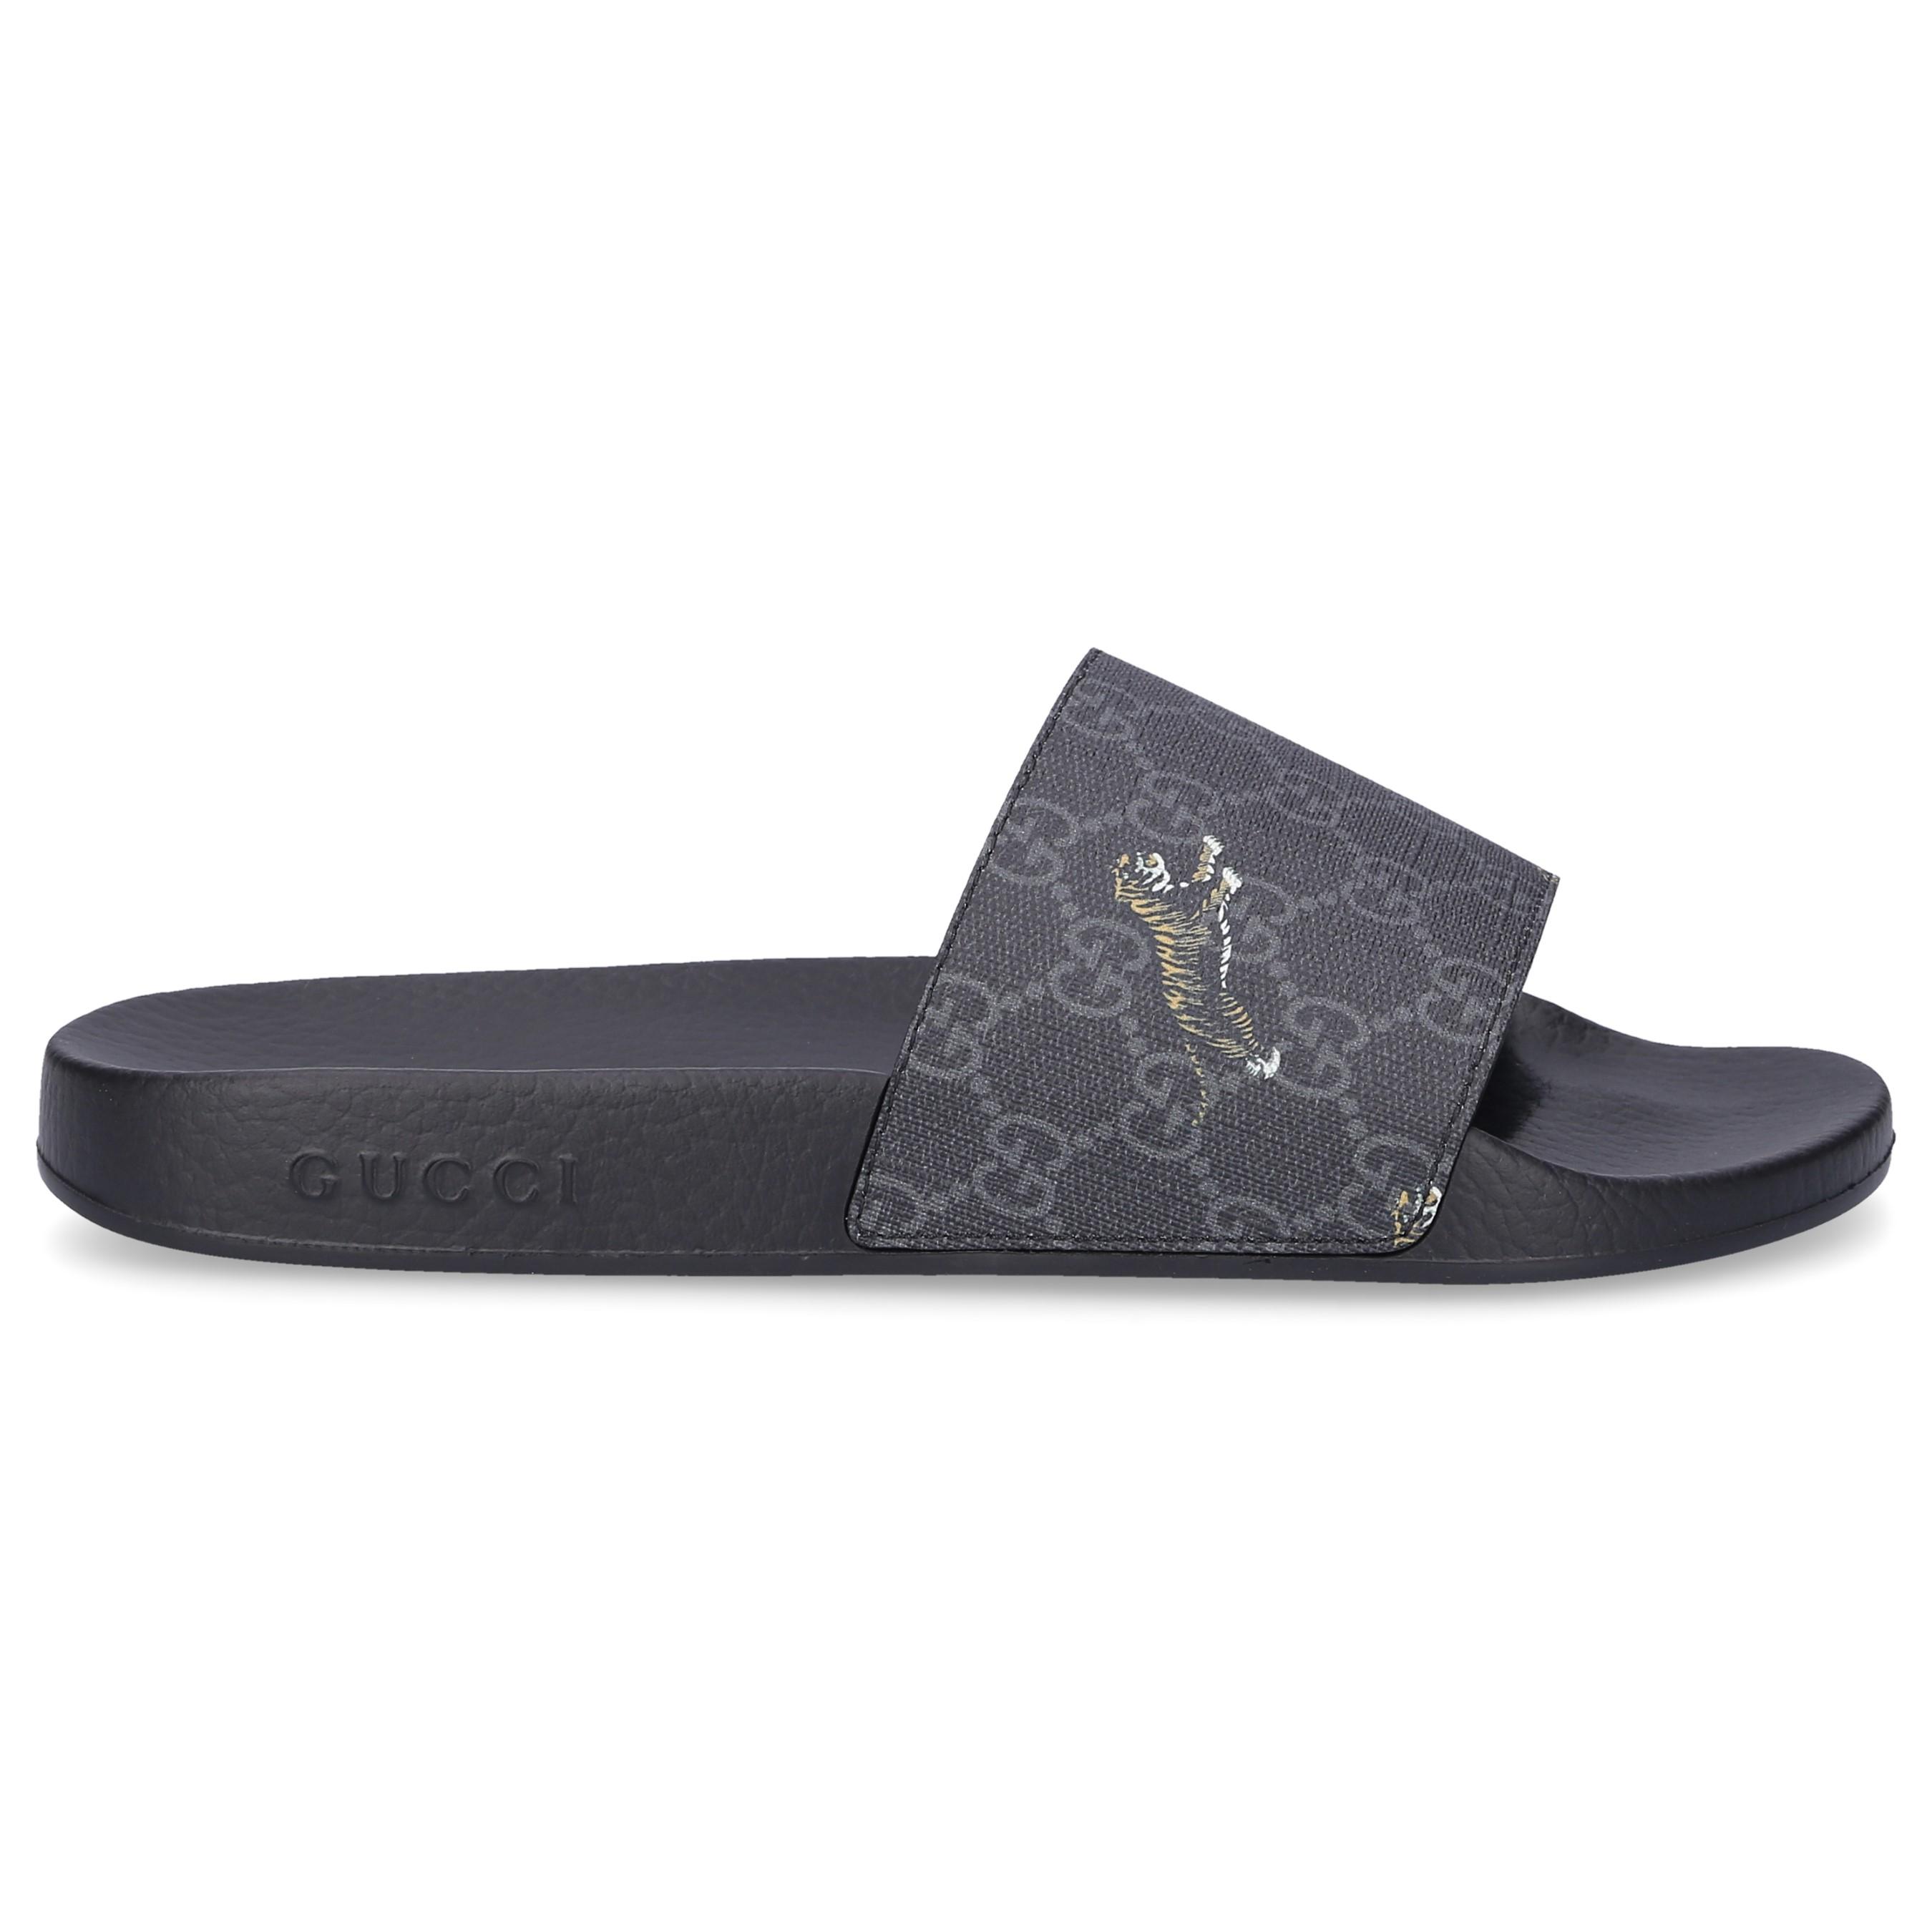 Gucci Beach Sandals Tigers Print in Gray for Men - Lyst